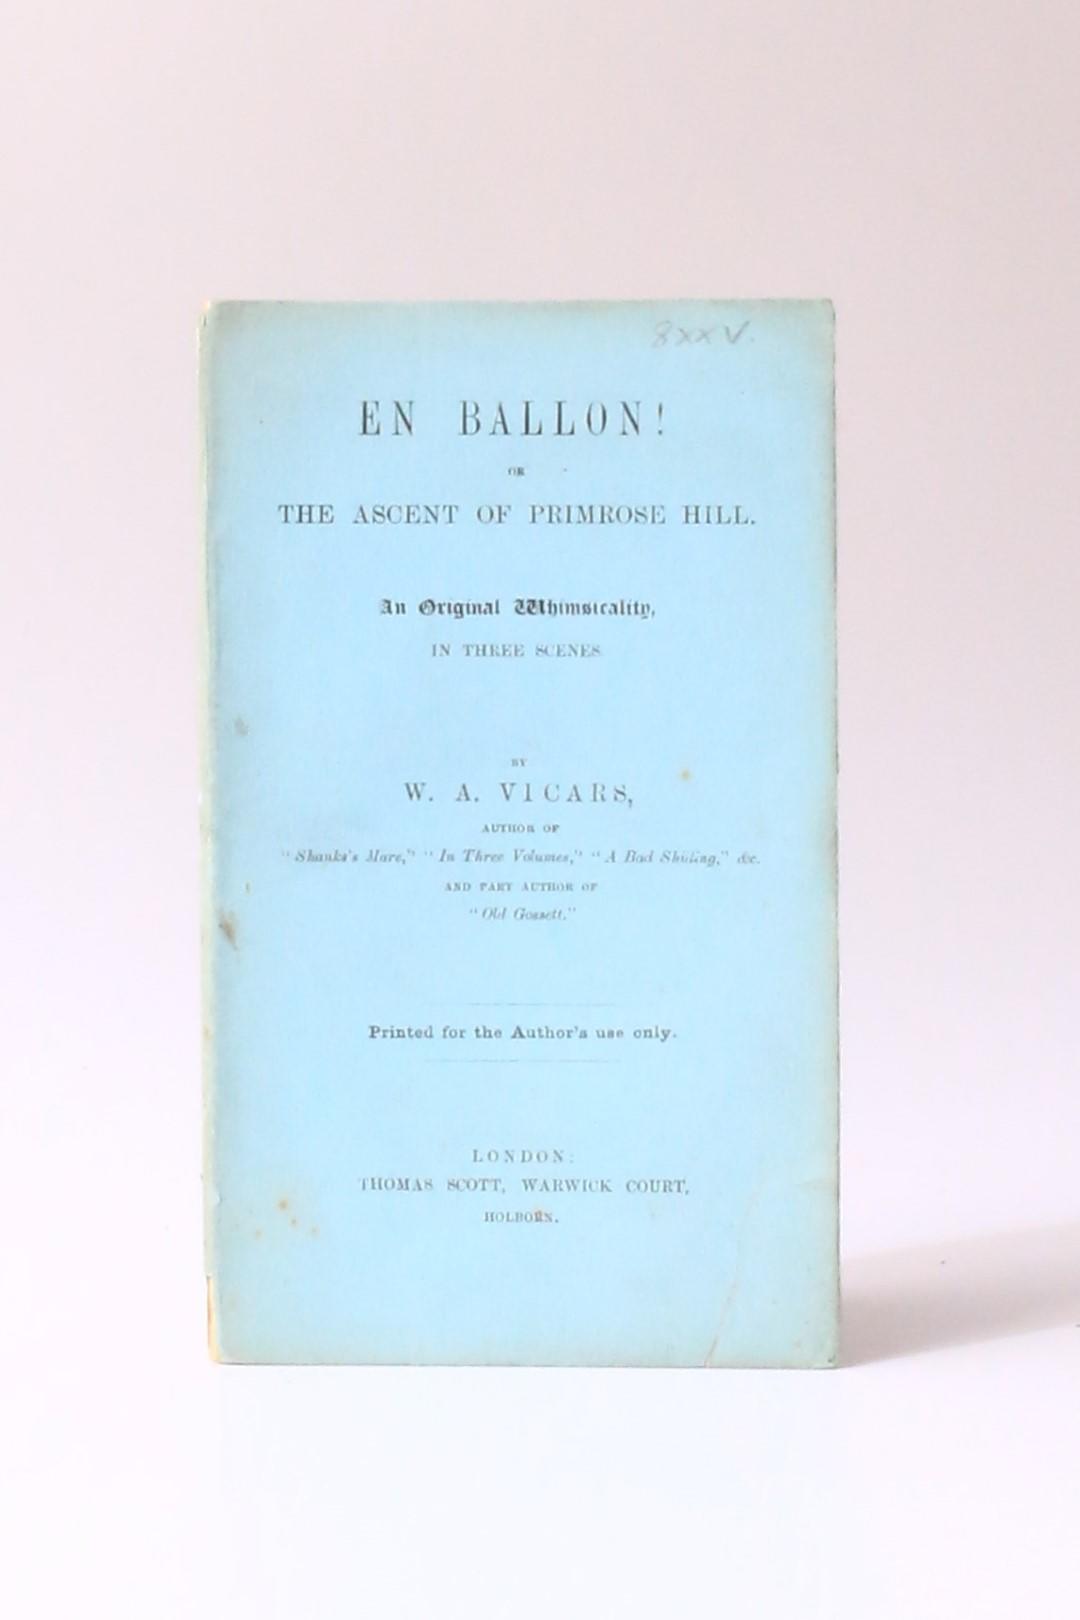 W.A. Vicars - En Ballon! Or The Ascent of Primrose Hill. An Original Whimsicality in Three Scenes - Thomas Scott, n.d. [1880s?], First Edition.